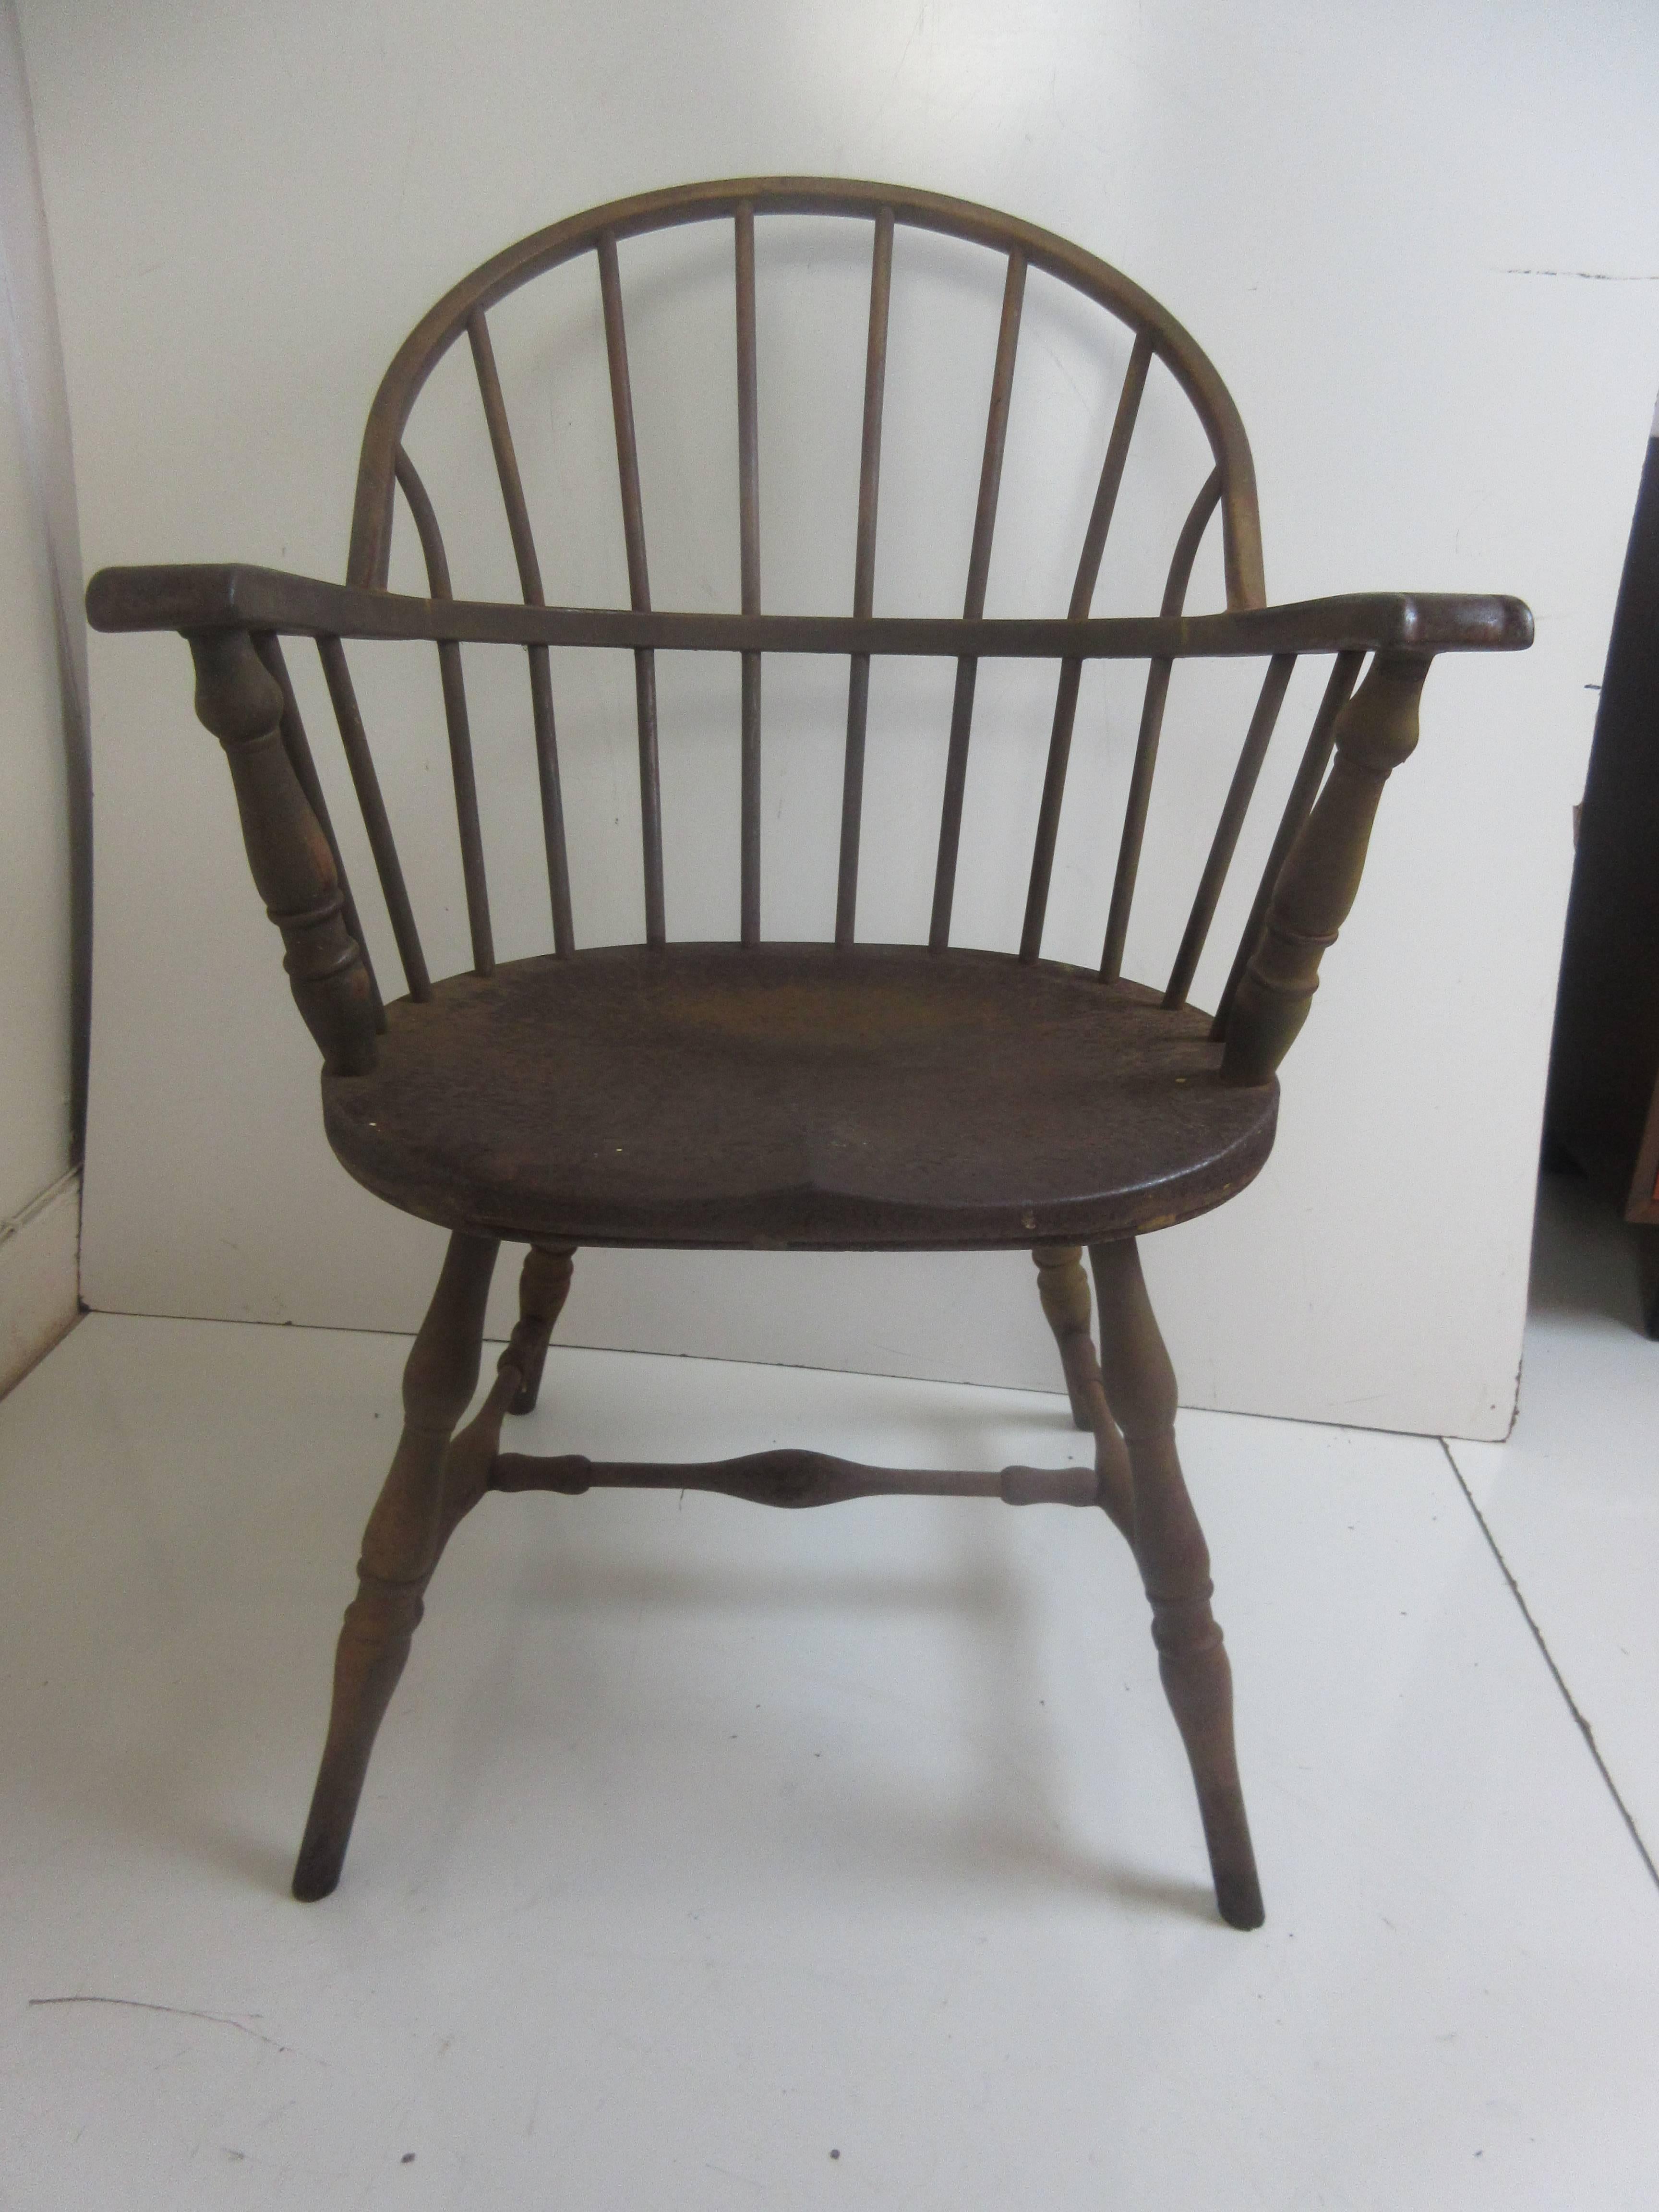 Windsor chair from Philadelphia Central Library in steel by Canton Art Metal Company. A traditional form in modern steel instead of the traditional wood graced the reading rooms of the Philadelphia Central Library in the 1930s. Chair has been much